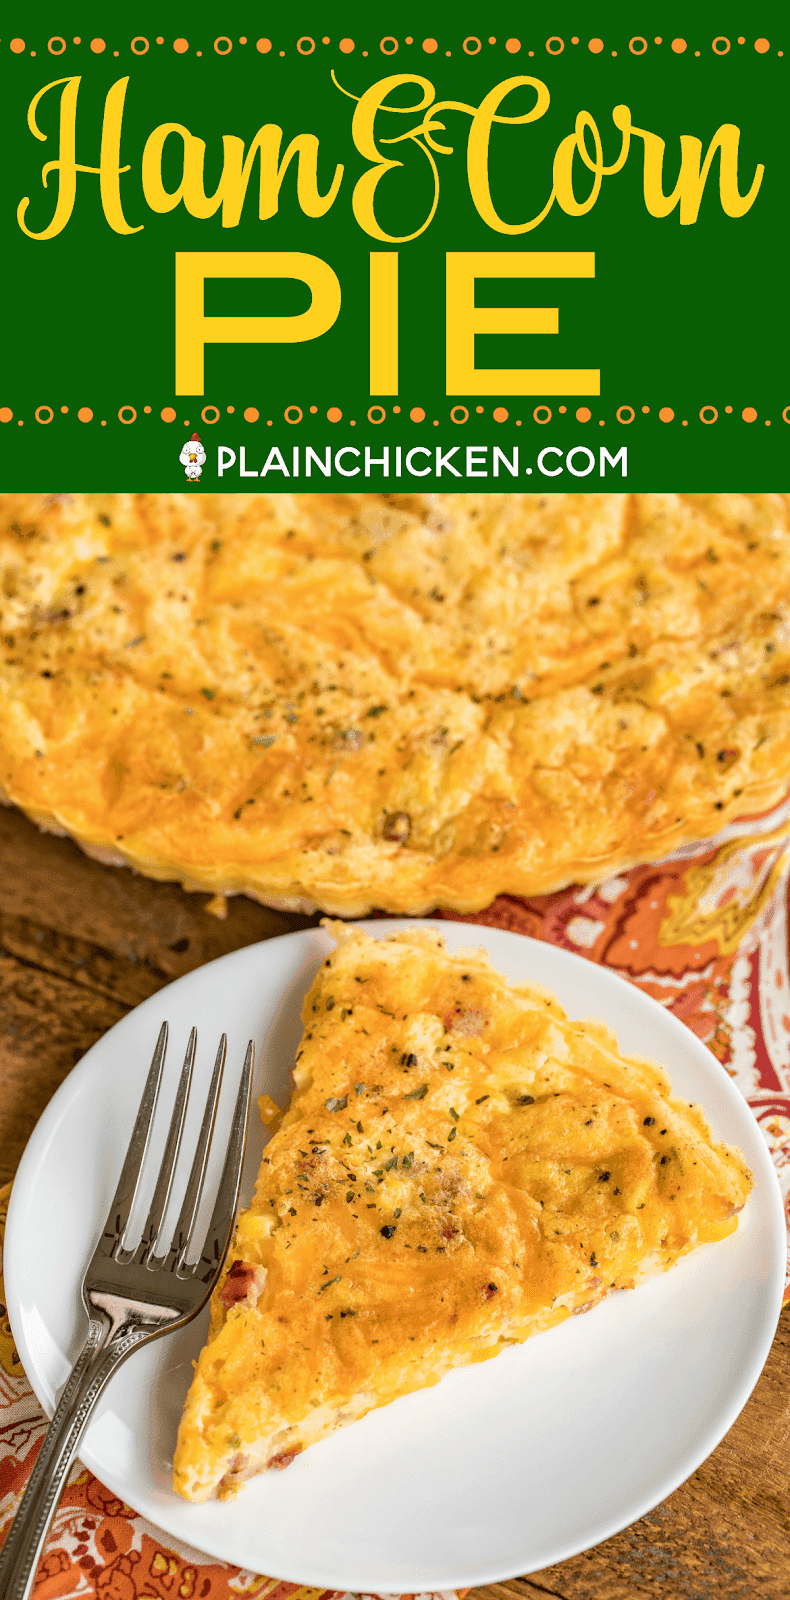 Ham & Corn Pie - crazy delicious! Crustless quiche loaded with ham, corn and cheese. Ready to bake in minutes! Ham, corn, cheddar cheese, eggs, Bisquick and milk. Great for breakfast, lunch or dinner. The whole family loved this easy recipe! #quiche #ham #cheese #kidfriendlyrecipe #dinnerrecipe